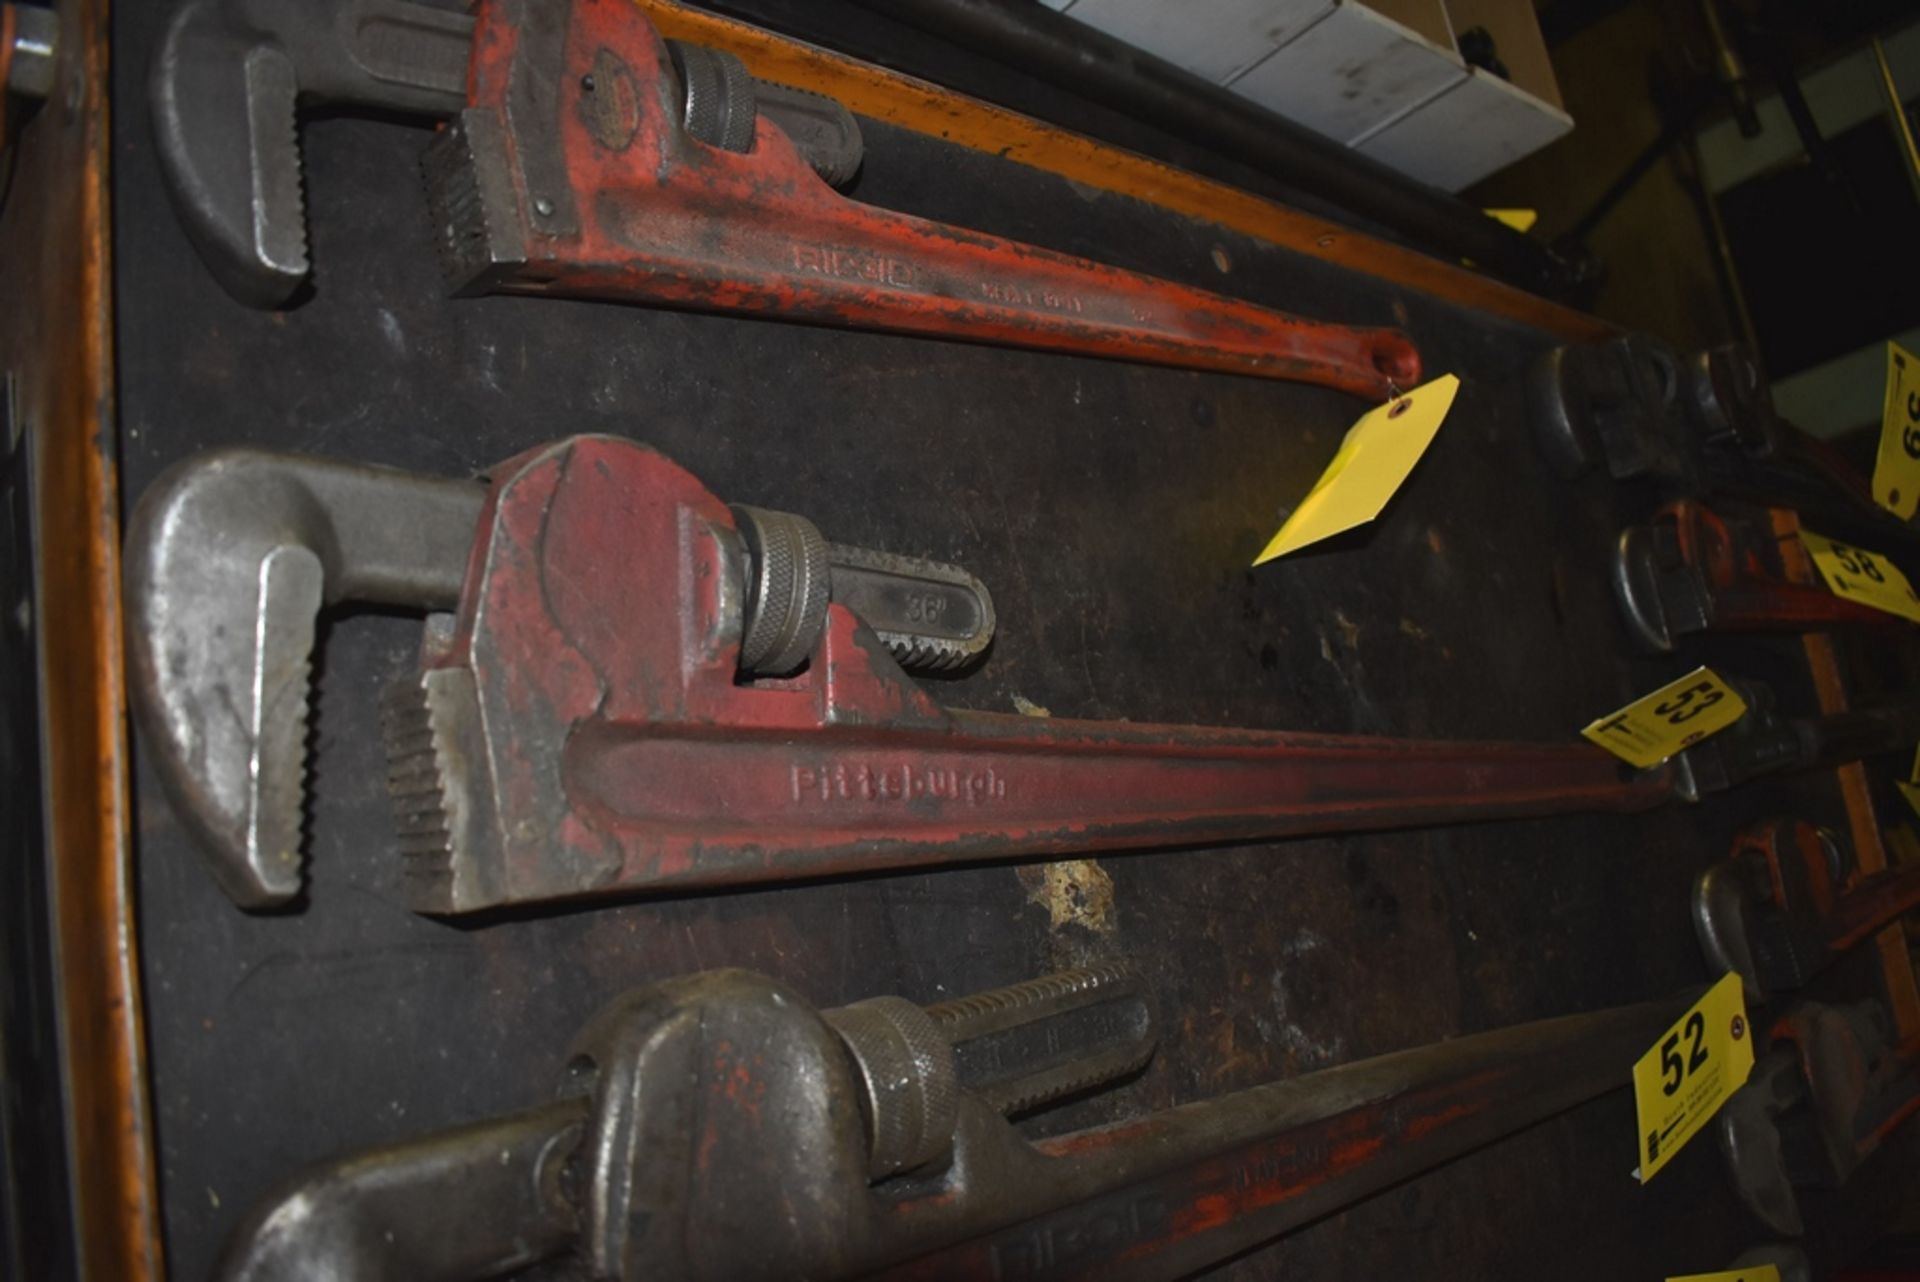 PITTSBURGH 36" PIPE WRENCH